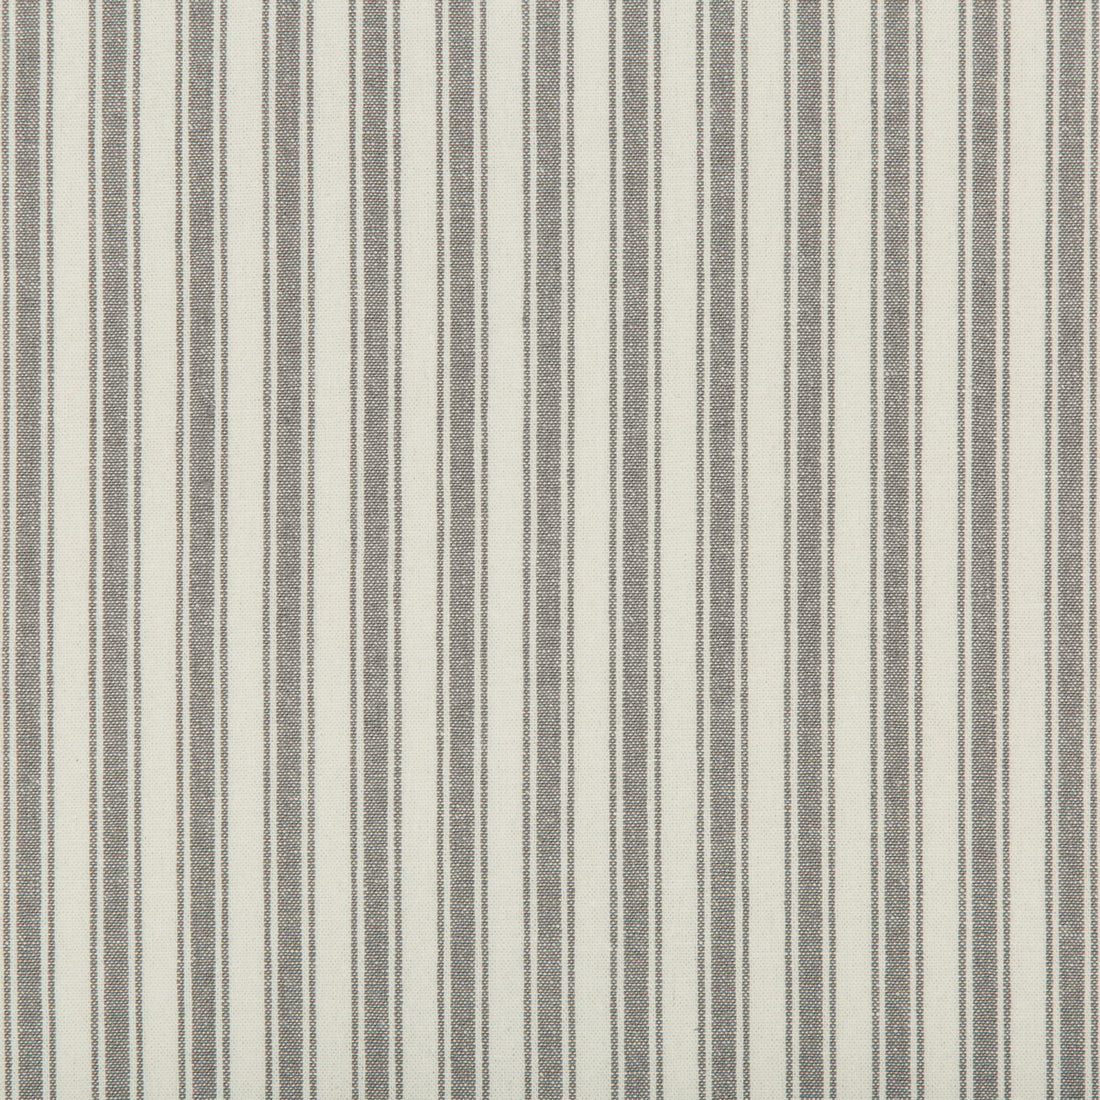 Seastripe fabric in graphite color - pattern 35542.11.0 - by Kravet Basics in the Bermuda collection